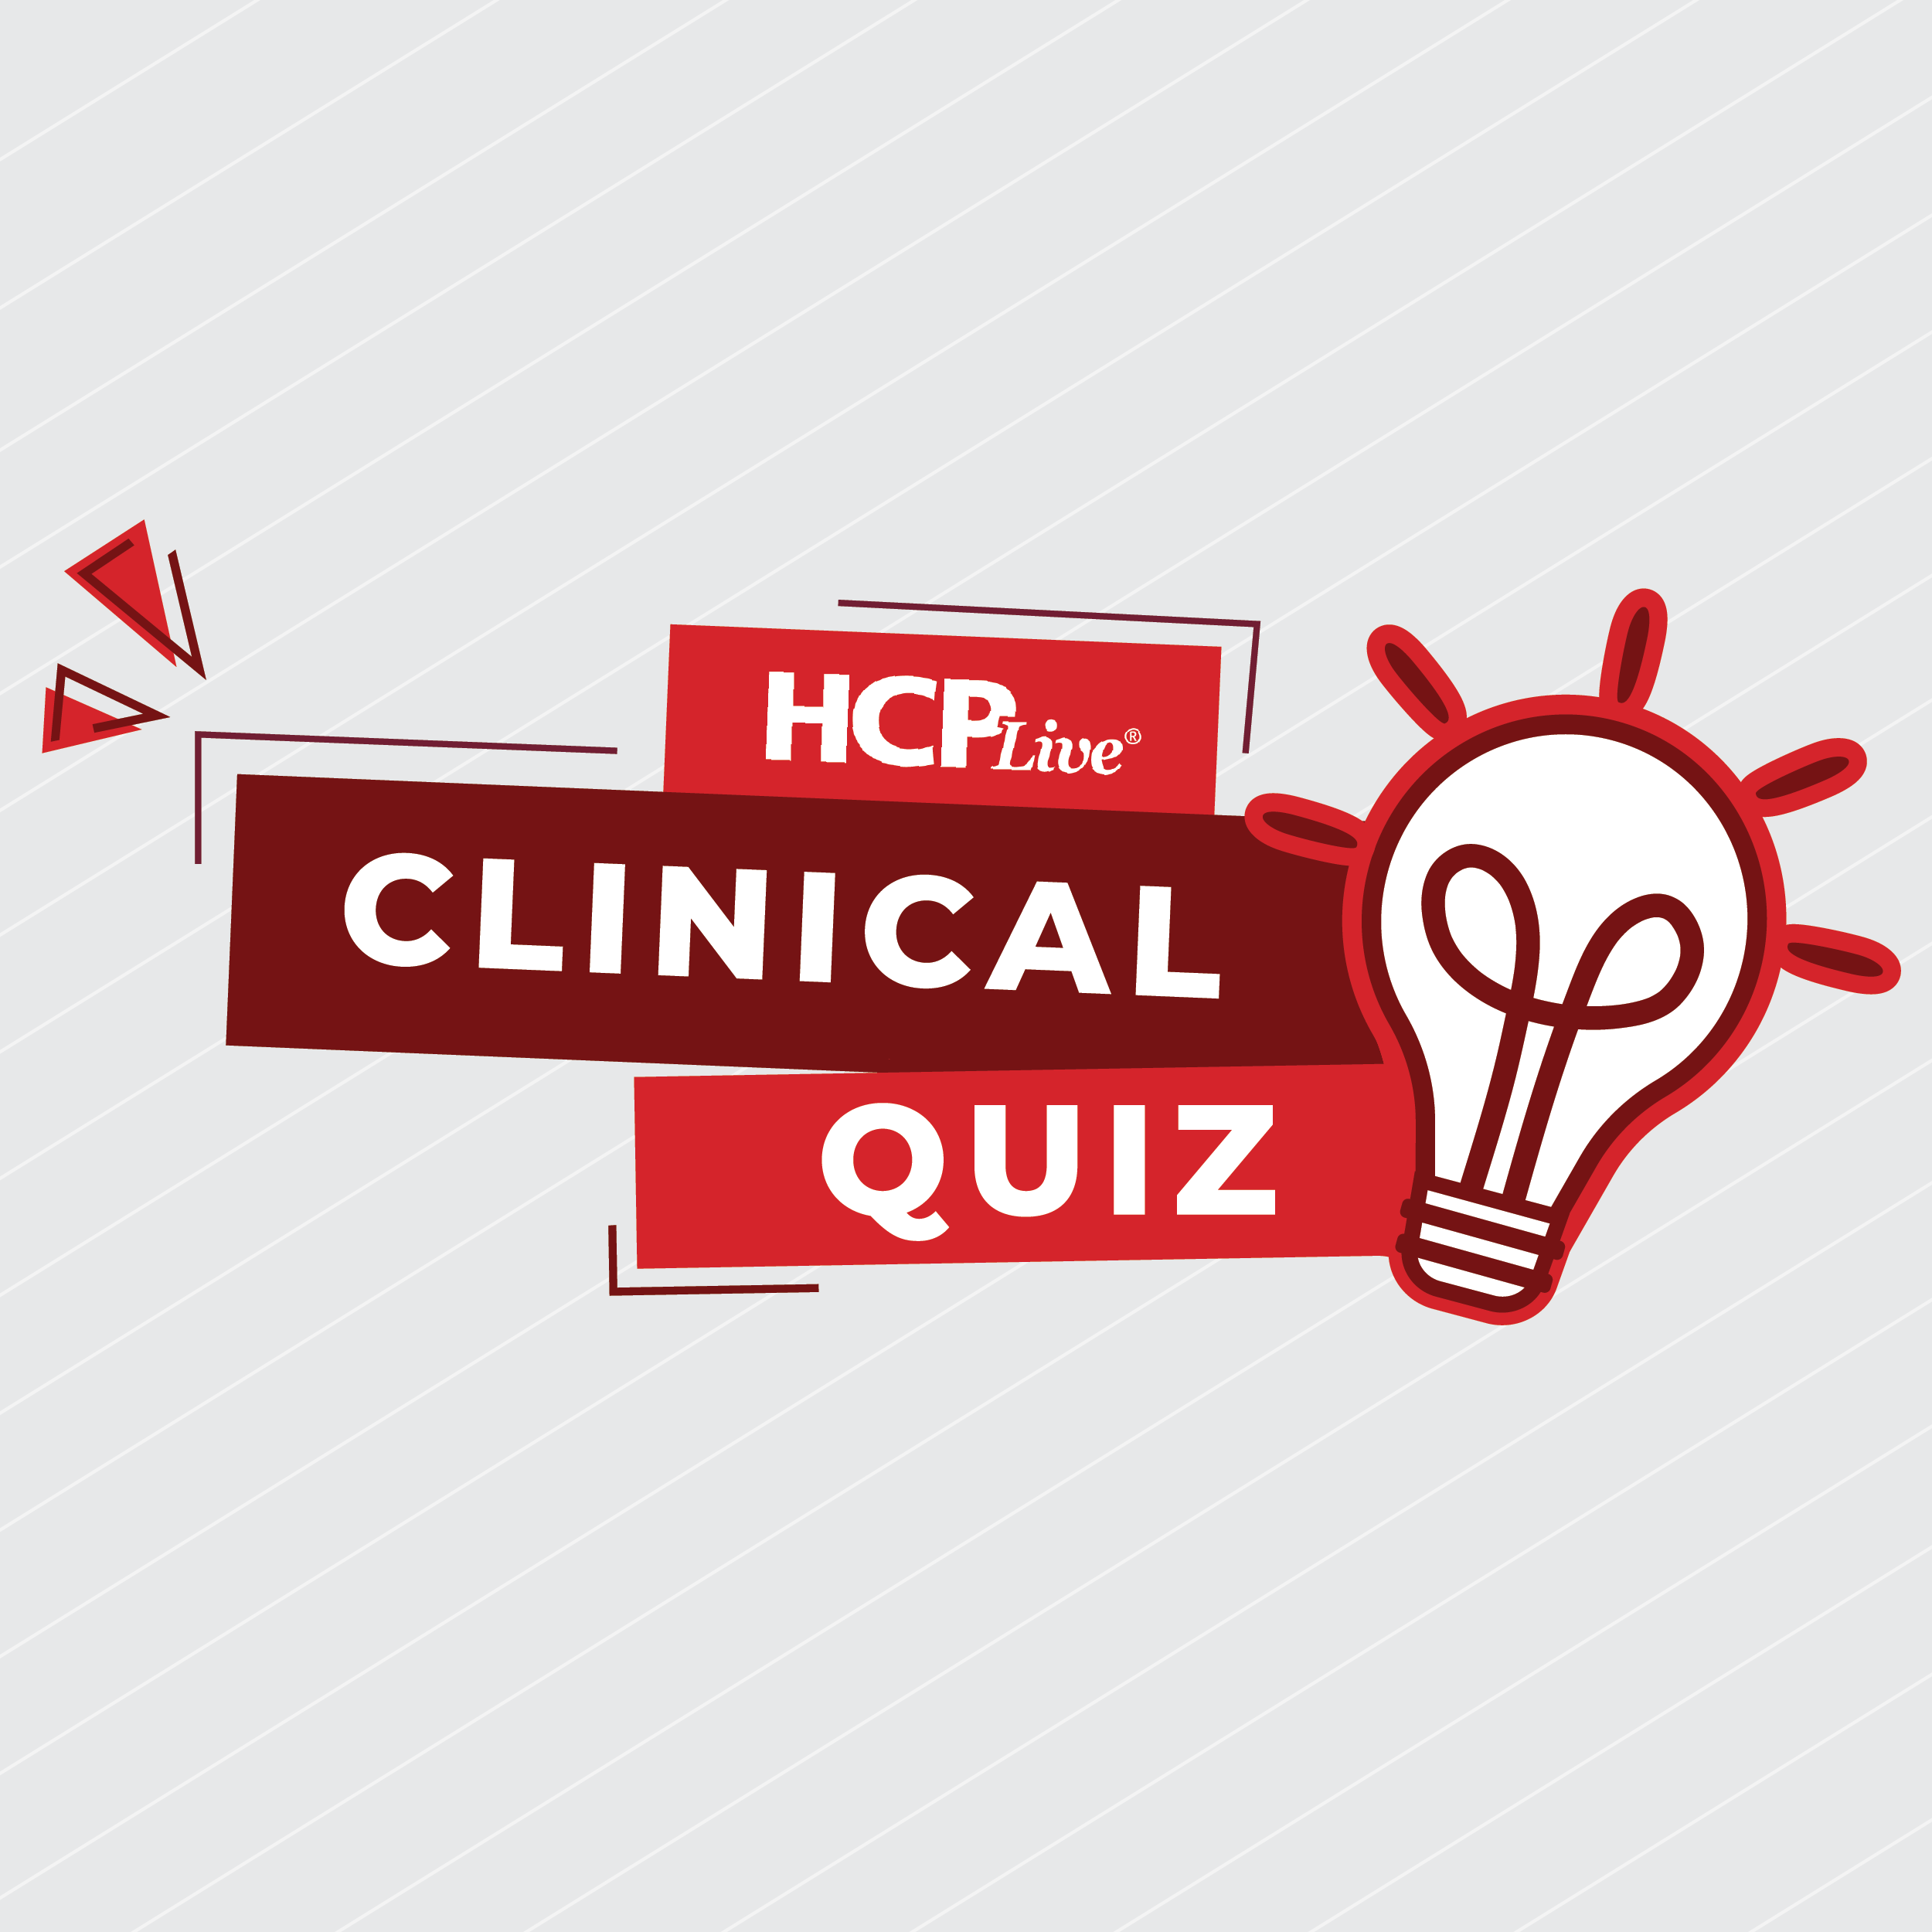 Clinical Quiz: Nutrient Supplementation in CKD from KDOQI Guidelines